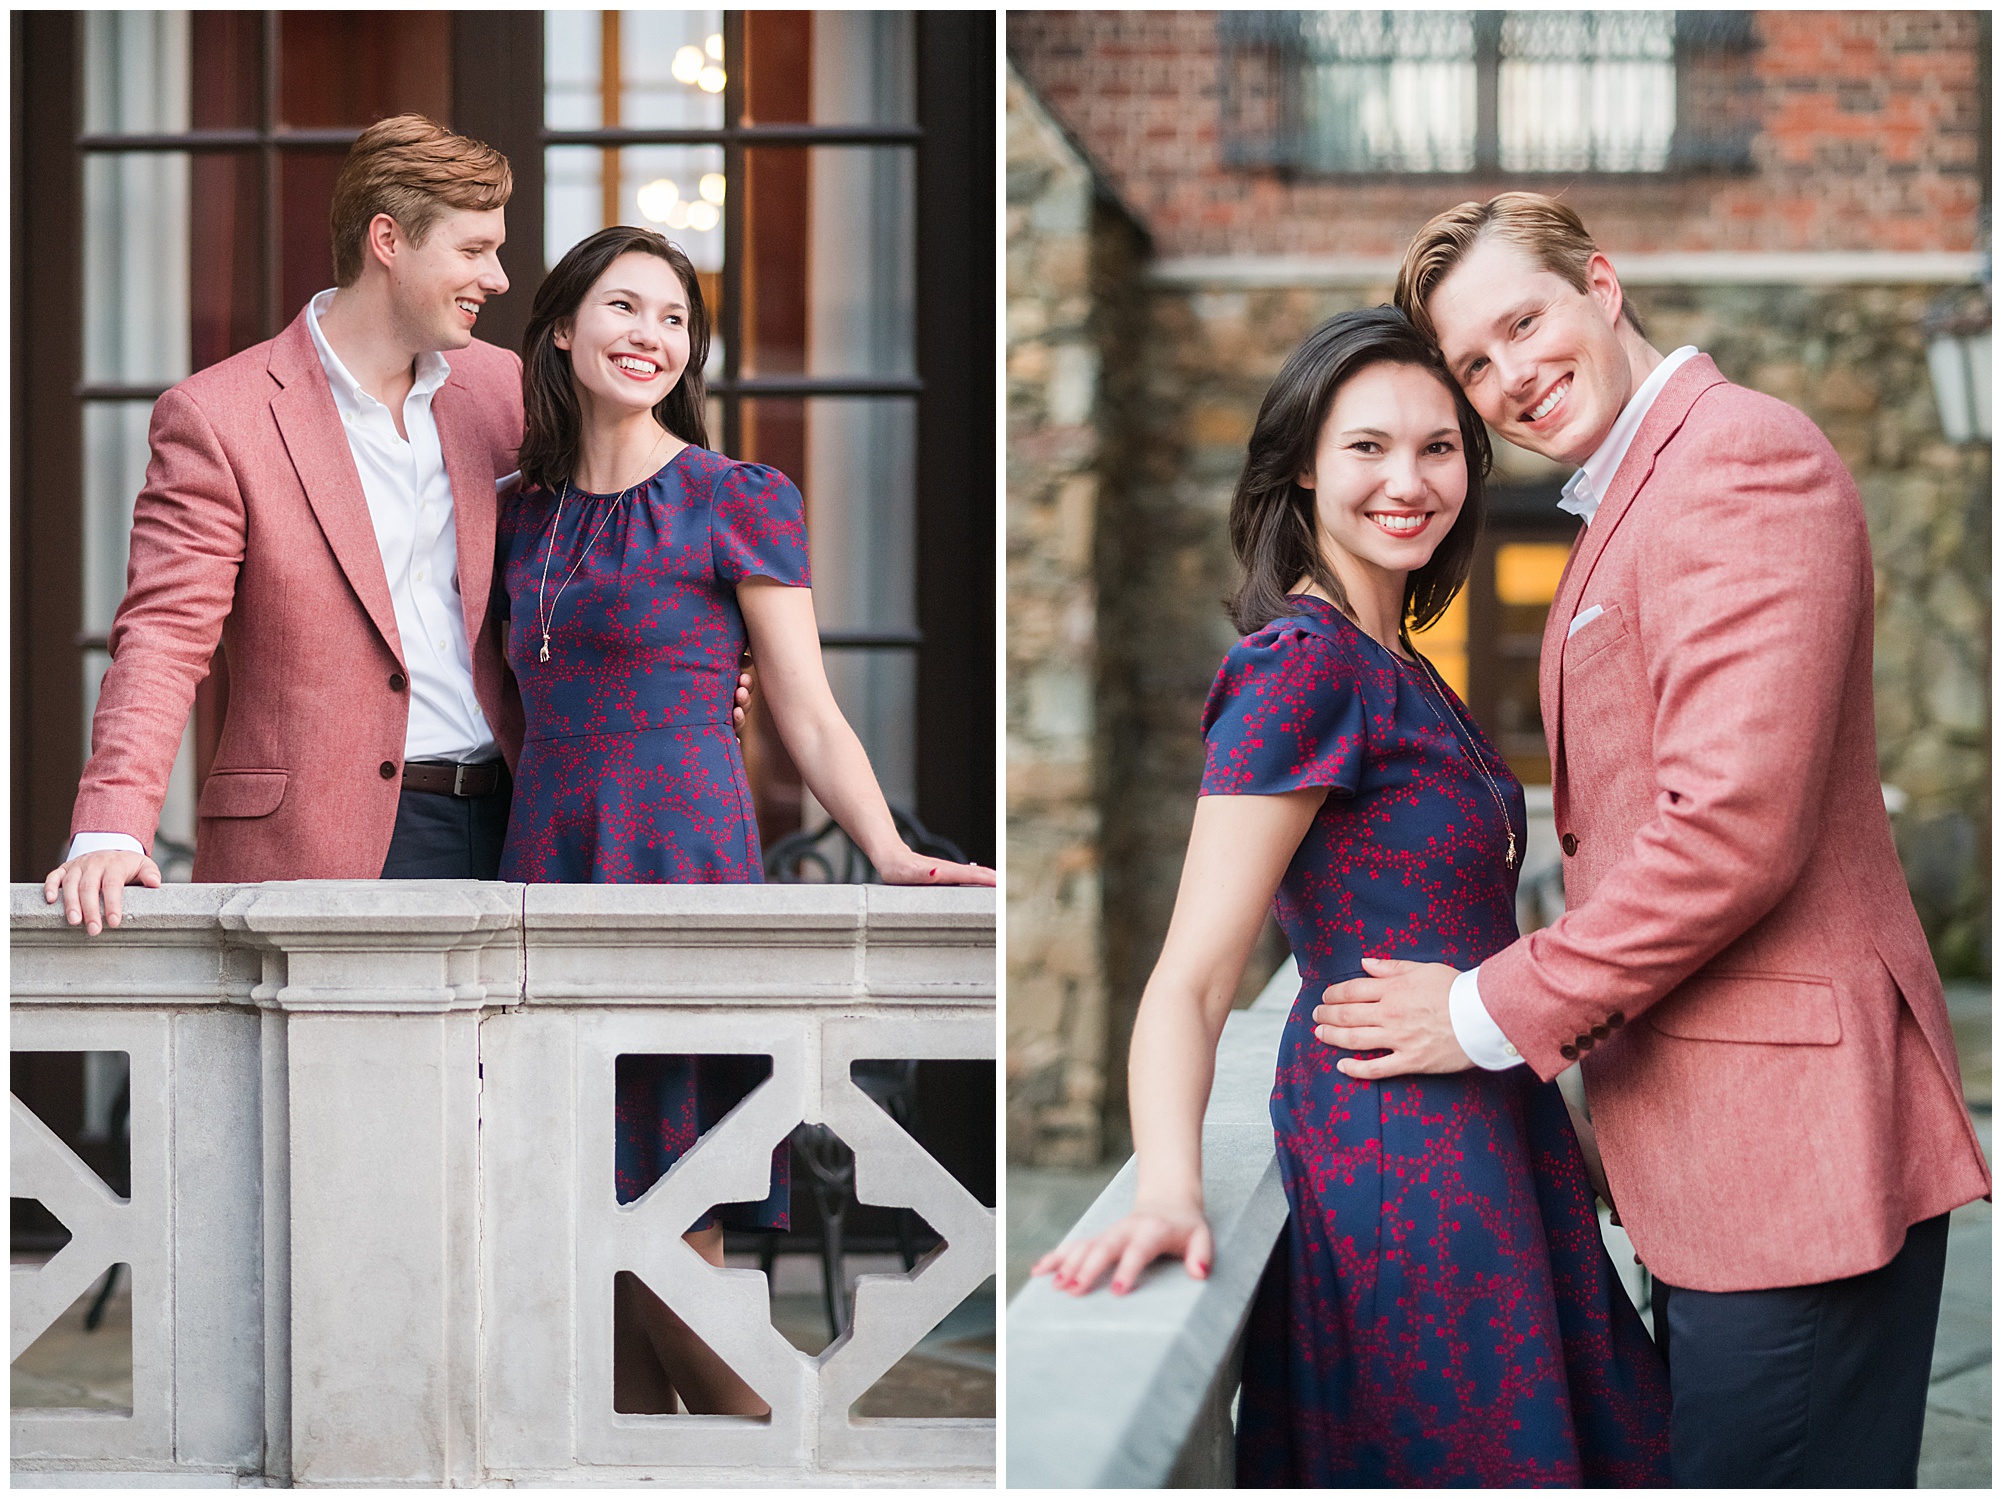 outdoor engagement photos at dover hall estate in richmond rva virginia in the summer in august